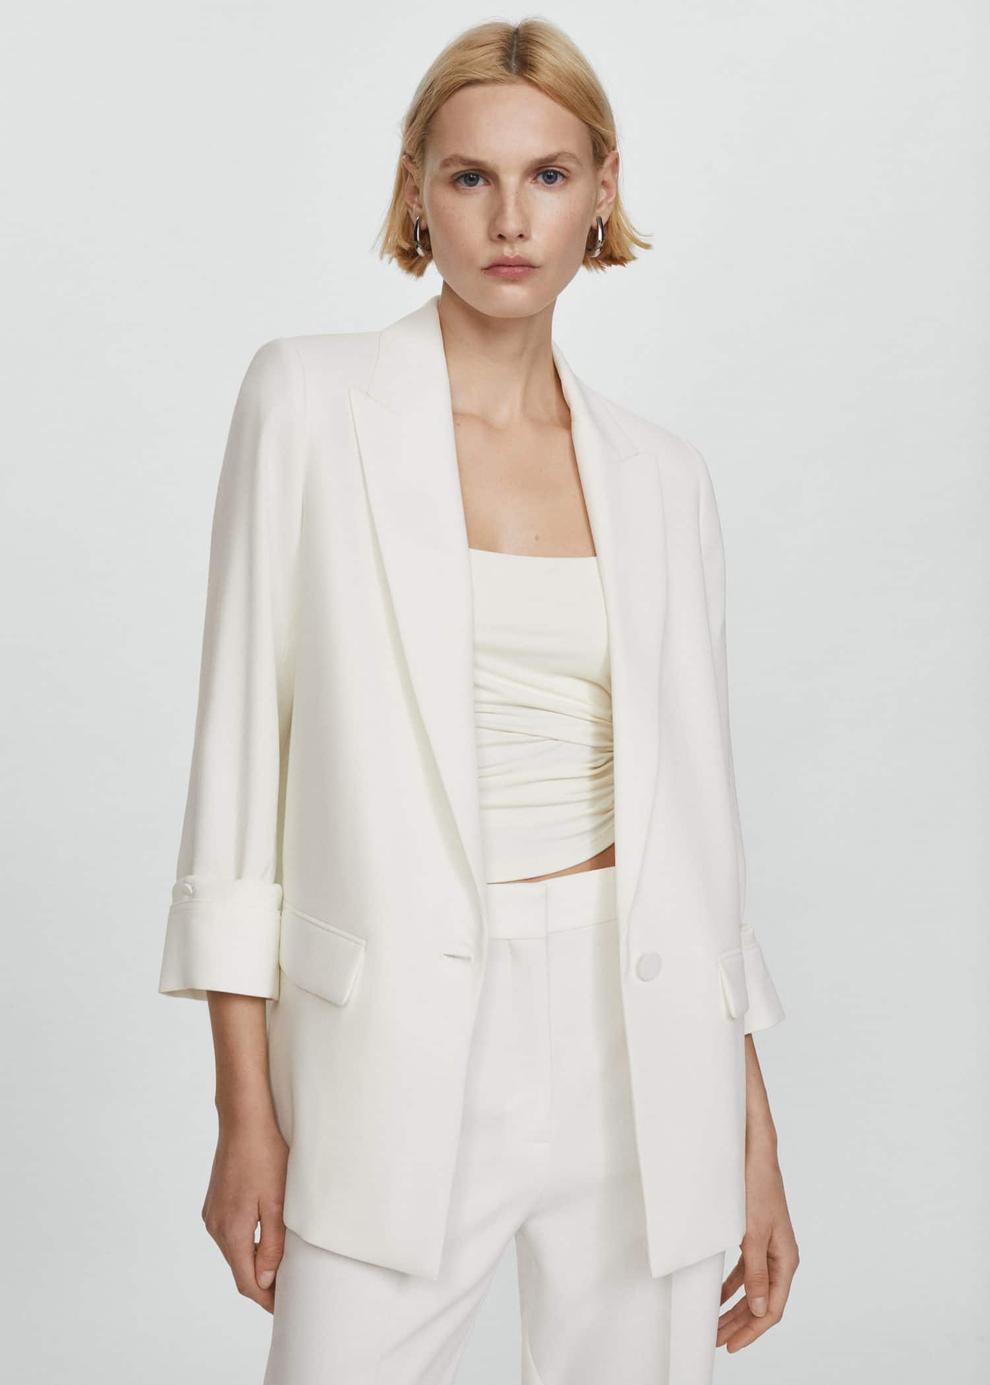 Tailored jacket with turn-down sleeves offers at £49.99 in MANGO